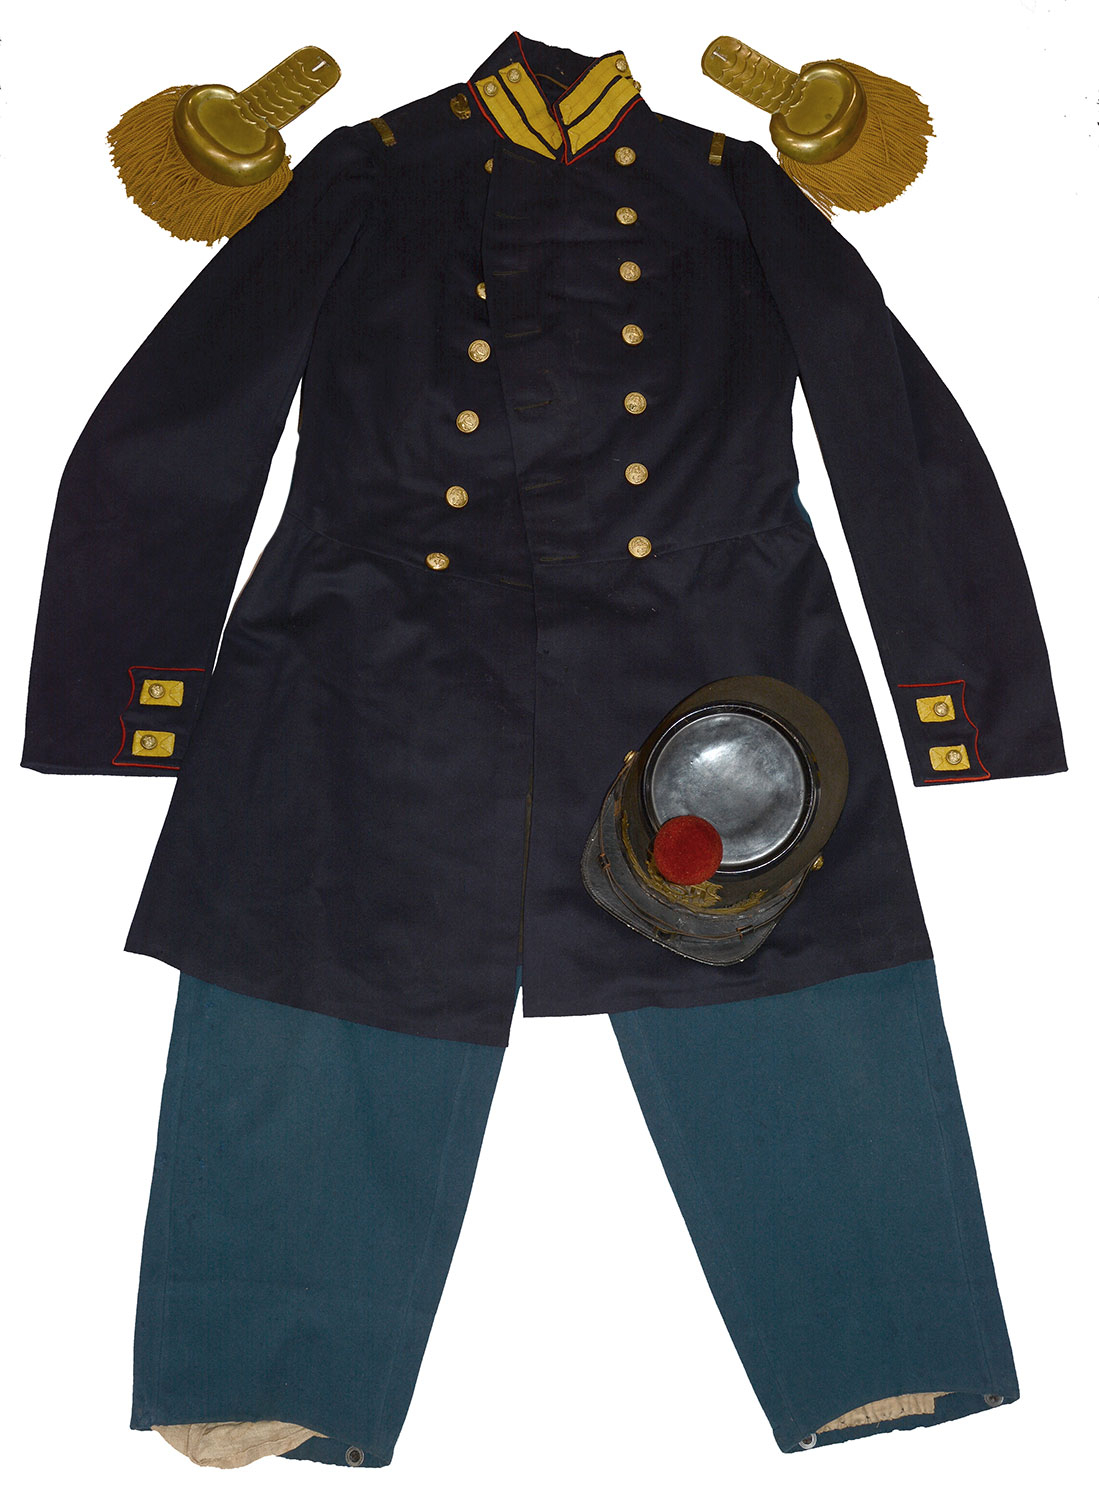 CIVIL WAR US MARINE CORPS GROUPING OF PRIVATE JOHN HAMMOND: REGULATION SHAKO, DRESS COAT, TROUSERS, FATIGUE CAP, AND KNAPSACK: THE SET IN THE BOOKS!